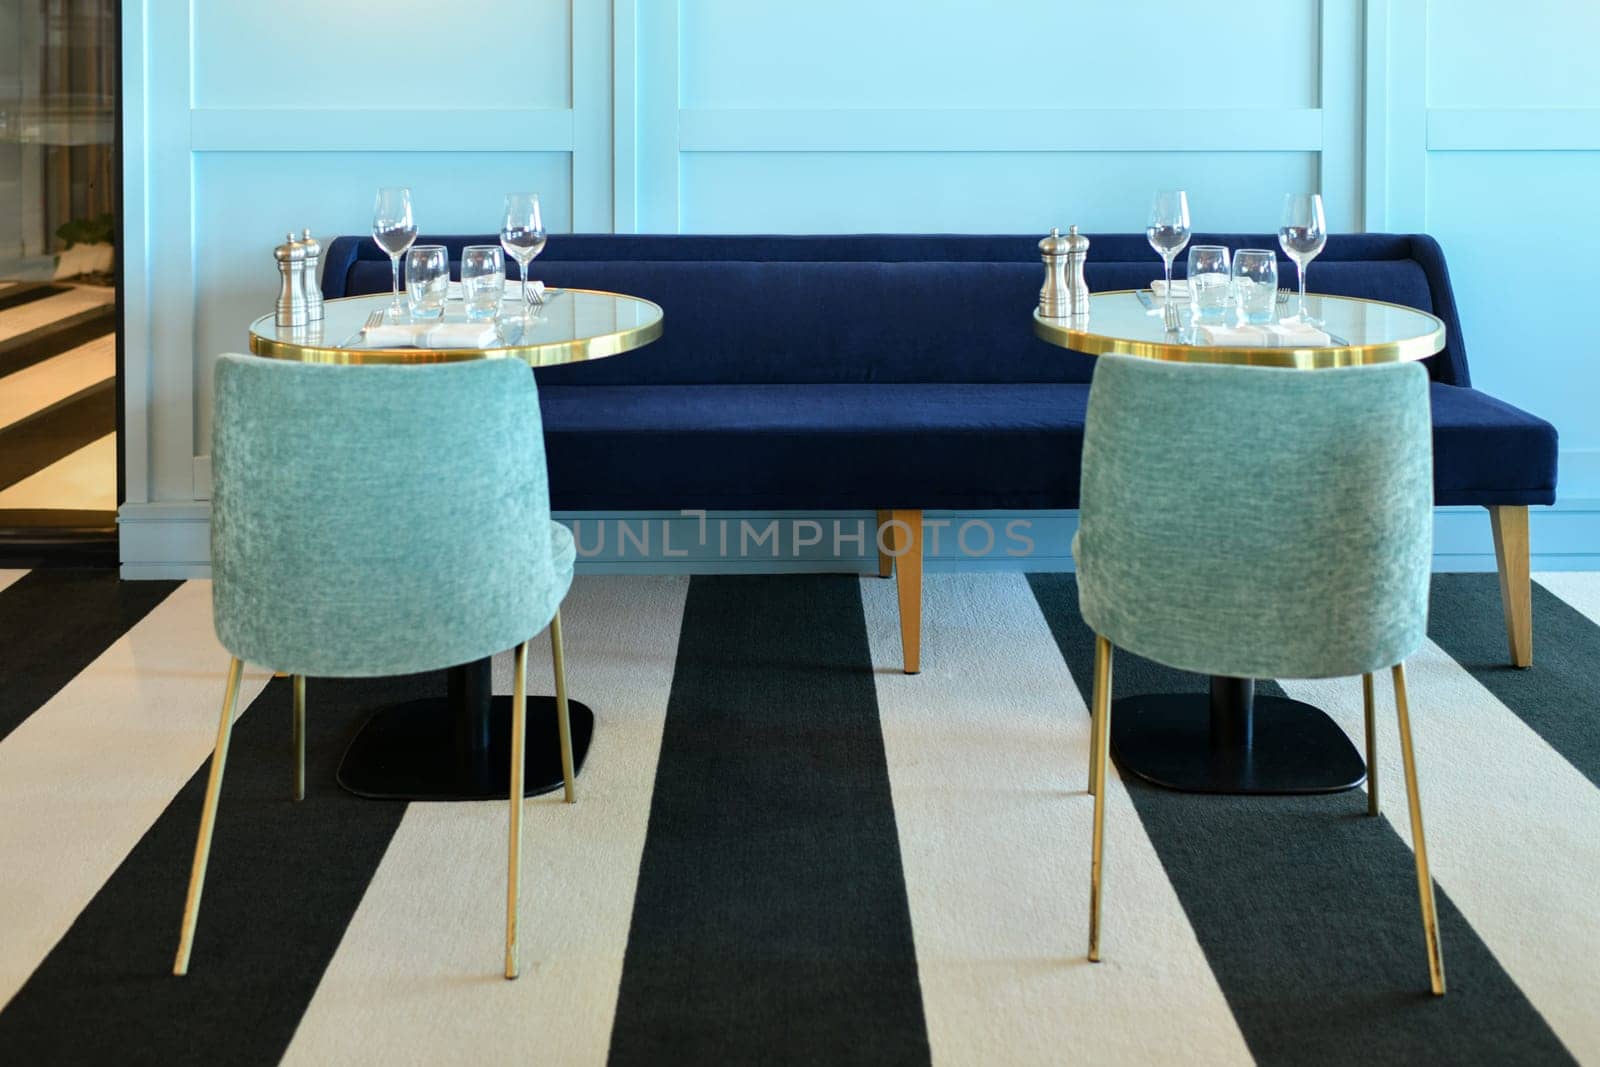 Served tables in a modern restaurant interior by Godi